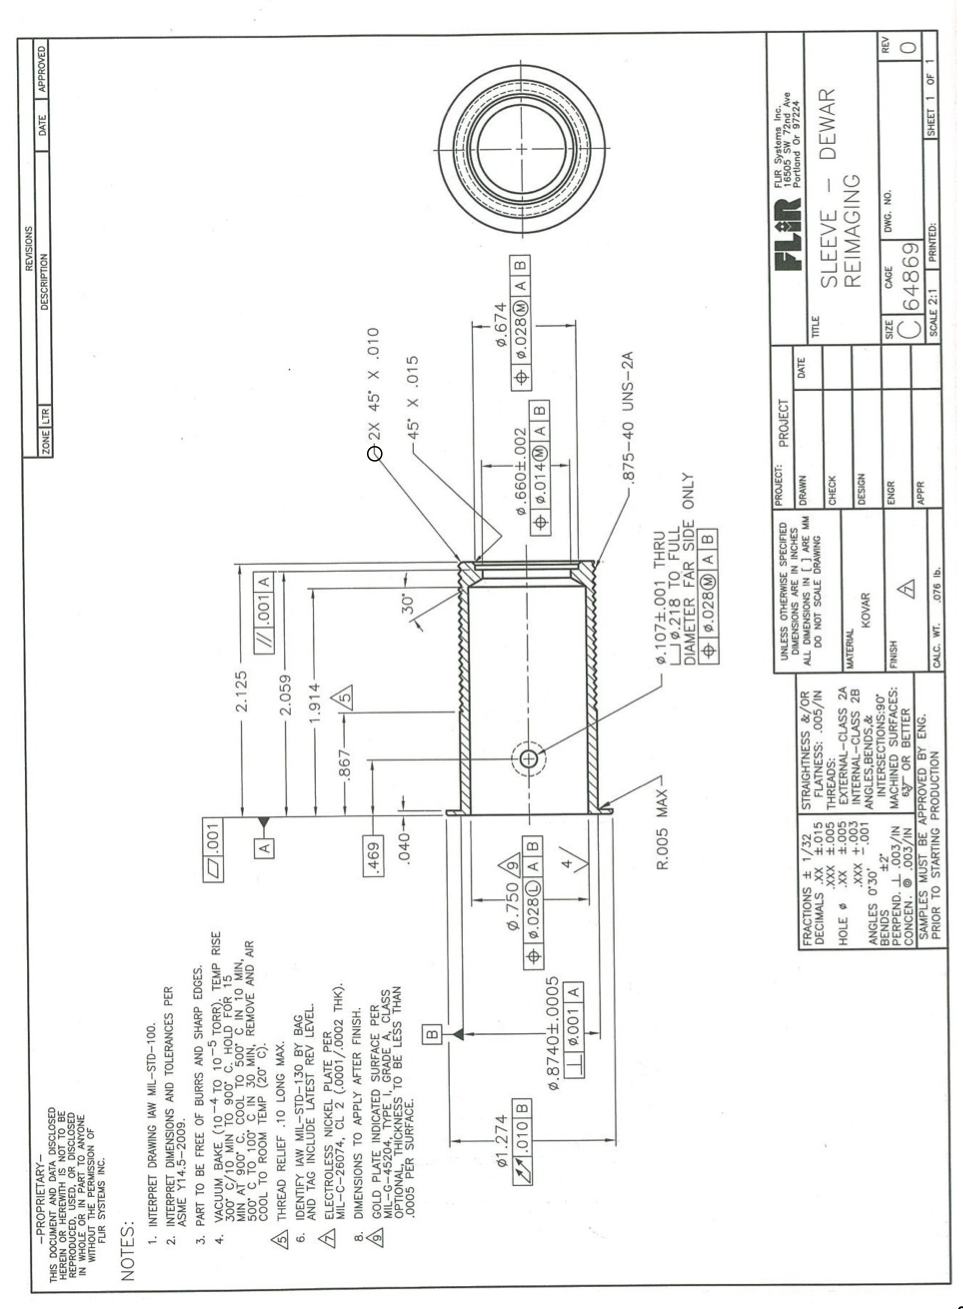 REVISIONS
DESCRIPTION
-PROPRIETARY-
THIS DOCUMENT AND DATA DISCLOSED
HEREIN OR HEREWITH IS NOT TO BE
REPRODUCED, USED, OR DISCLOSED
IN WHOLE OR IN PART TO ANYONE
WITHOUT THE PERMISSION OF
FLIR SYSTEMS INC.
ZONE LTR
DATE
APPROVED
NOTES:
1. INTERPRET DRAWING IAW MIL-STD-100.
2. INTERPRET DIMENSIONS AND TOLERANCES PER
ASME Y14.5-2009.
3. PART TO BE FREE OF BURRS AND SHARP EDGES.
O.001
VACUUM BAKE (10-4 TO 10 TORR). TEMP RISE
300 C/10 MIN TO 900 C. HOLD FOR 15
MIN AT 900 C. COOL TO 500 C IN 10 MIN,
500 C TO 100 C IN 30 MIN, REMOVE AND AIR
COOL TO ROOM TEMP (20 C).
2.125
A
.001 A
/5 THREAD RELIEF .10 LONG MAX.
2.059
6. IDENTIFY IAW MIL-STD-130 BY BAG
AND TAG INCLUDE LATEST REV LEVEL.
1.914-
/A ELECTROLESS NICKEL PLATE PER
MIL-C-26074, CL 2 (.0001/.0002 THK).
.867
8. DIMENSIONS TO APPLY AFTER FINISH.
9 GOLD PLATE INDICATED SURFACE PER
MIL-G-45204, TYPE_ I, GRADE A, CLASS
OPTIONAL, THICKNESS TO BE LESS THAN
.0005 PER SURFACE.
696
2X 45° X .010
- 45° X .015
ø1.274
ø.674
Ø.750 /9
+ø.028© AB
E.010 B
+ø.0280 AB
|+ 0.014@ A|
Ø.8740±.0005
I0.001 A
.875-40 UNS-2A
R.005 MAX -
Ø.107±.001 THRU
Uø.218 TO FULL
DIAMETER FAR SIDE ONLY
ø.028@ A B
PROJECT:
UNLESS OTHERWISE SPECIFIED
DIMENSIONS ARE IN INCHES
ALL DIMENSIONS IN [] ARE MM DRAWN
DO NOT SCALE DRAWING
FLIR
FLIR Systems Inc.
16505 sw 72nd Ave
Portland Or 97224
PROJECT
FRACTIONS + 1/32
DECIMALS XX 1.015
STRAIGHTNESS &/OR
FLATNESS: .005/IN
DATE
TITLE
G00'F XXX
THREADS:
SLEEVE
DEWAR
CHECK
HOLE
±.005 EXTERNAL-CLASS 2A
INTERNAL-CLASS 28
ANGLES,BENDS,&
INTERSECTIONS:90
PERPEND. I .003/IN MACHINED SURFACES:
Y OR BETTER
SAMPLES MUST BE APPROVED BY ENG.
XX
MATERIAL
REIMAGING
-.001
C00+ XXX
DESIGN
KOVAR
ANGLES O'30'
BENDS
FINISH
ENGR
DWG. NO.
REV
CONCEN. O.003/IN
64869
APPR
PRIOR TO STARTING PRODUCTION
CALC. WT.
SCALE 2:1
PRINTED:
SHEET 1 OF
